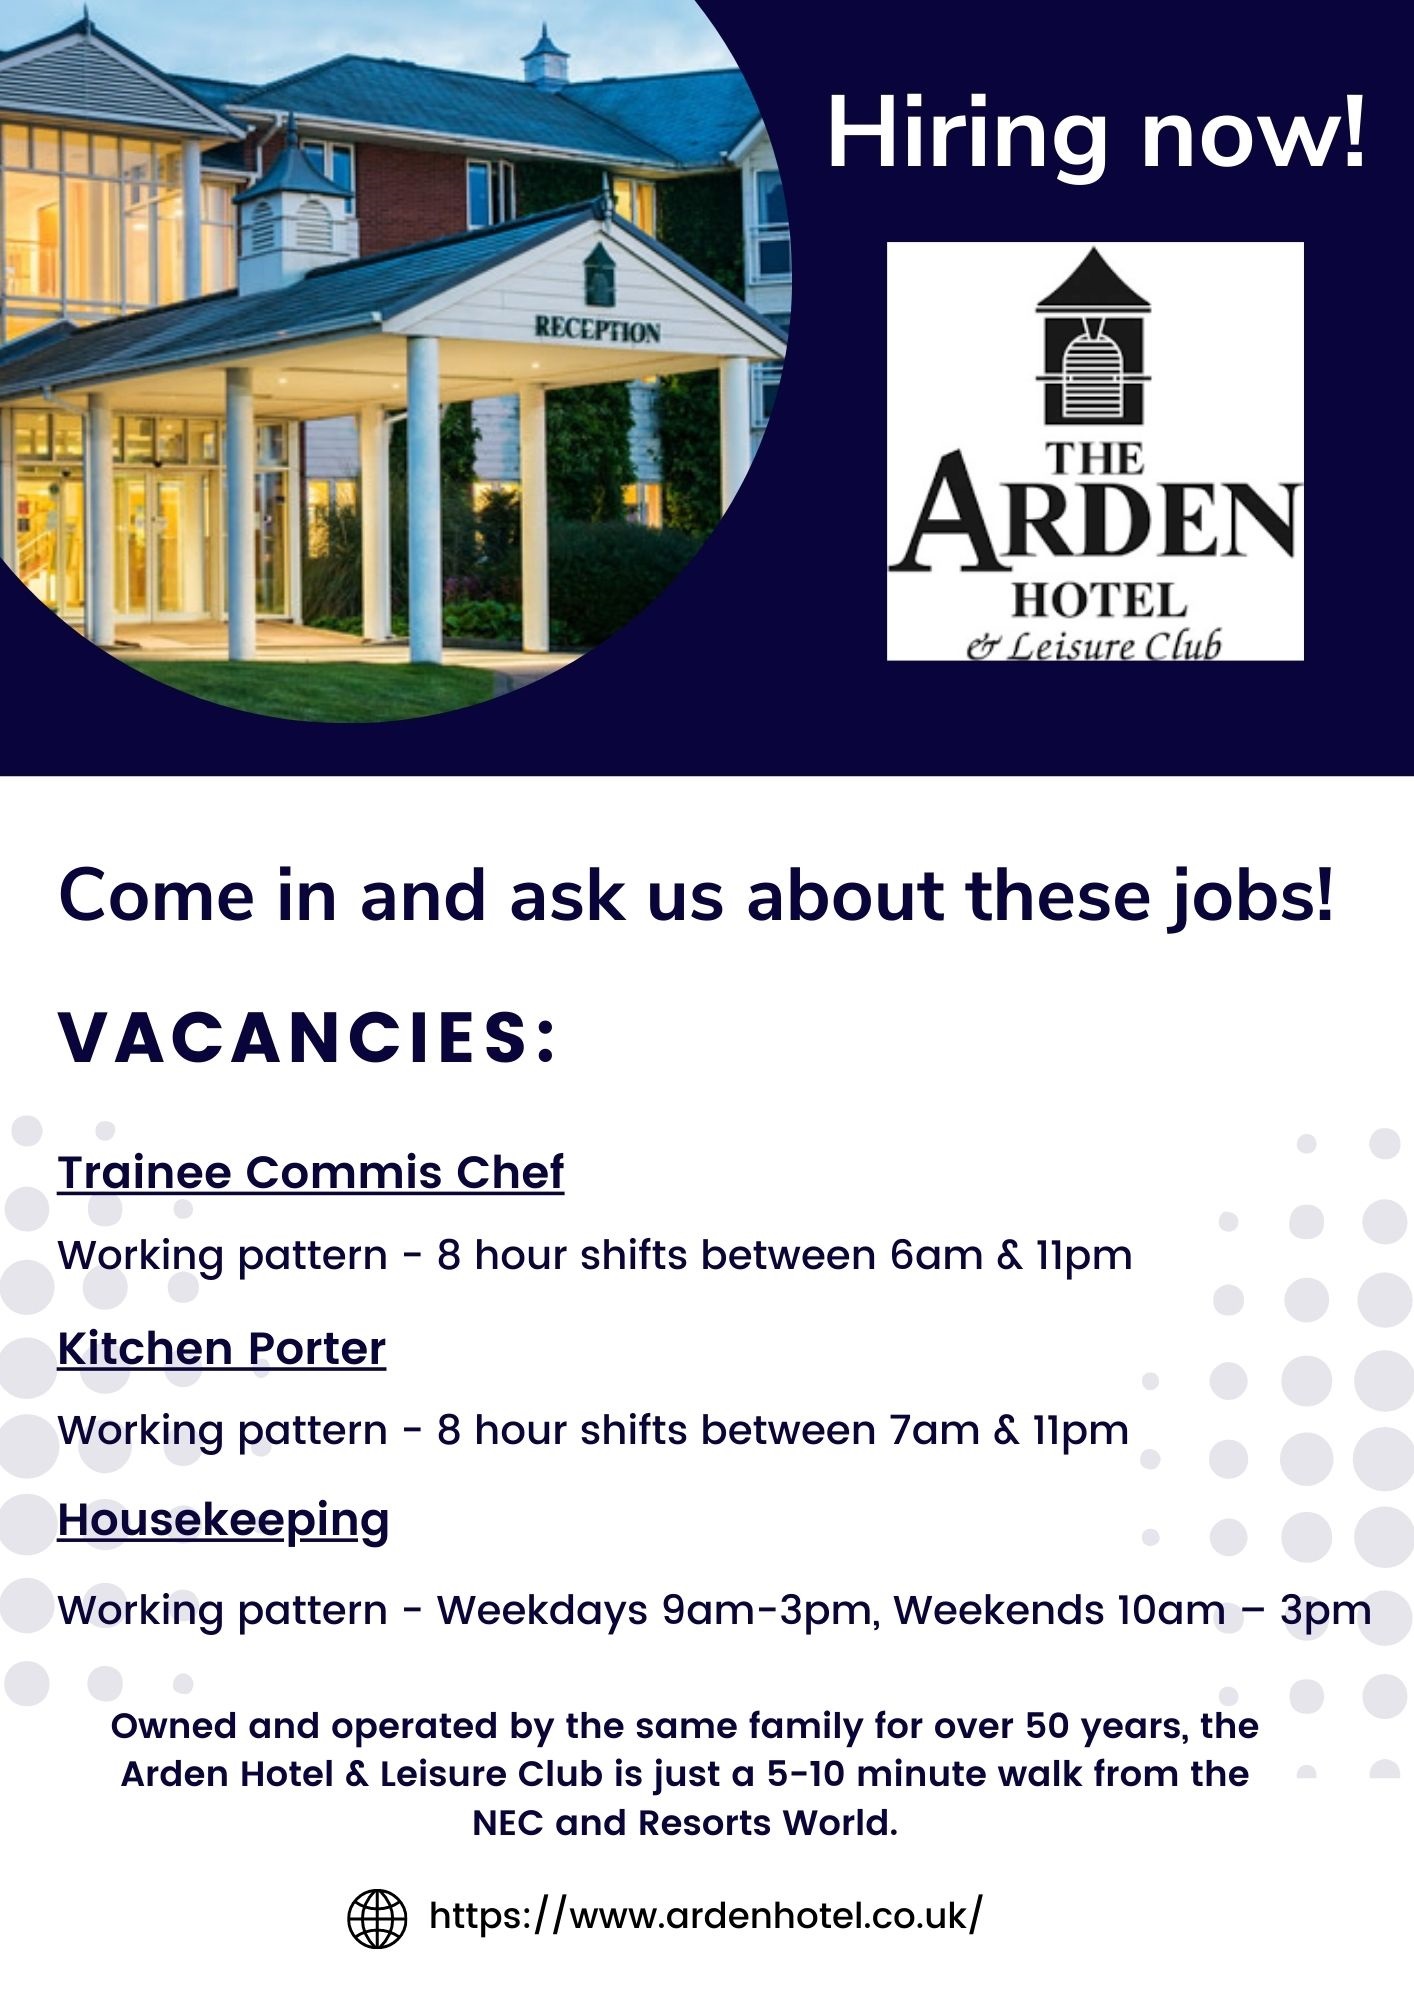 Jobs at The Arden Hotel